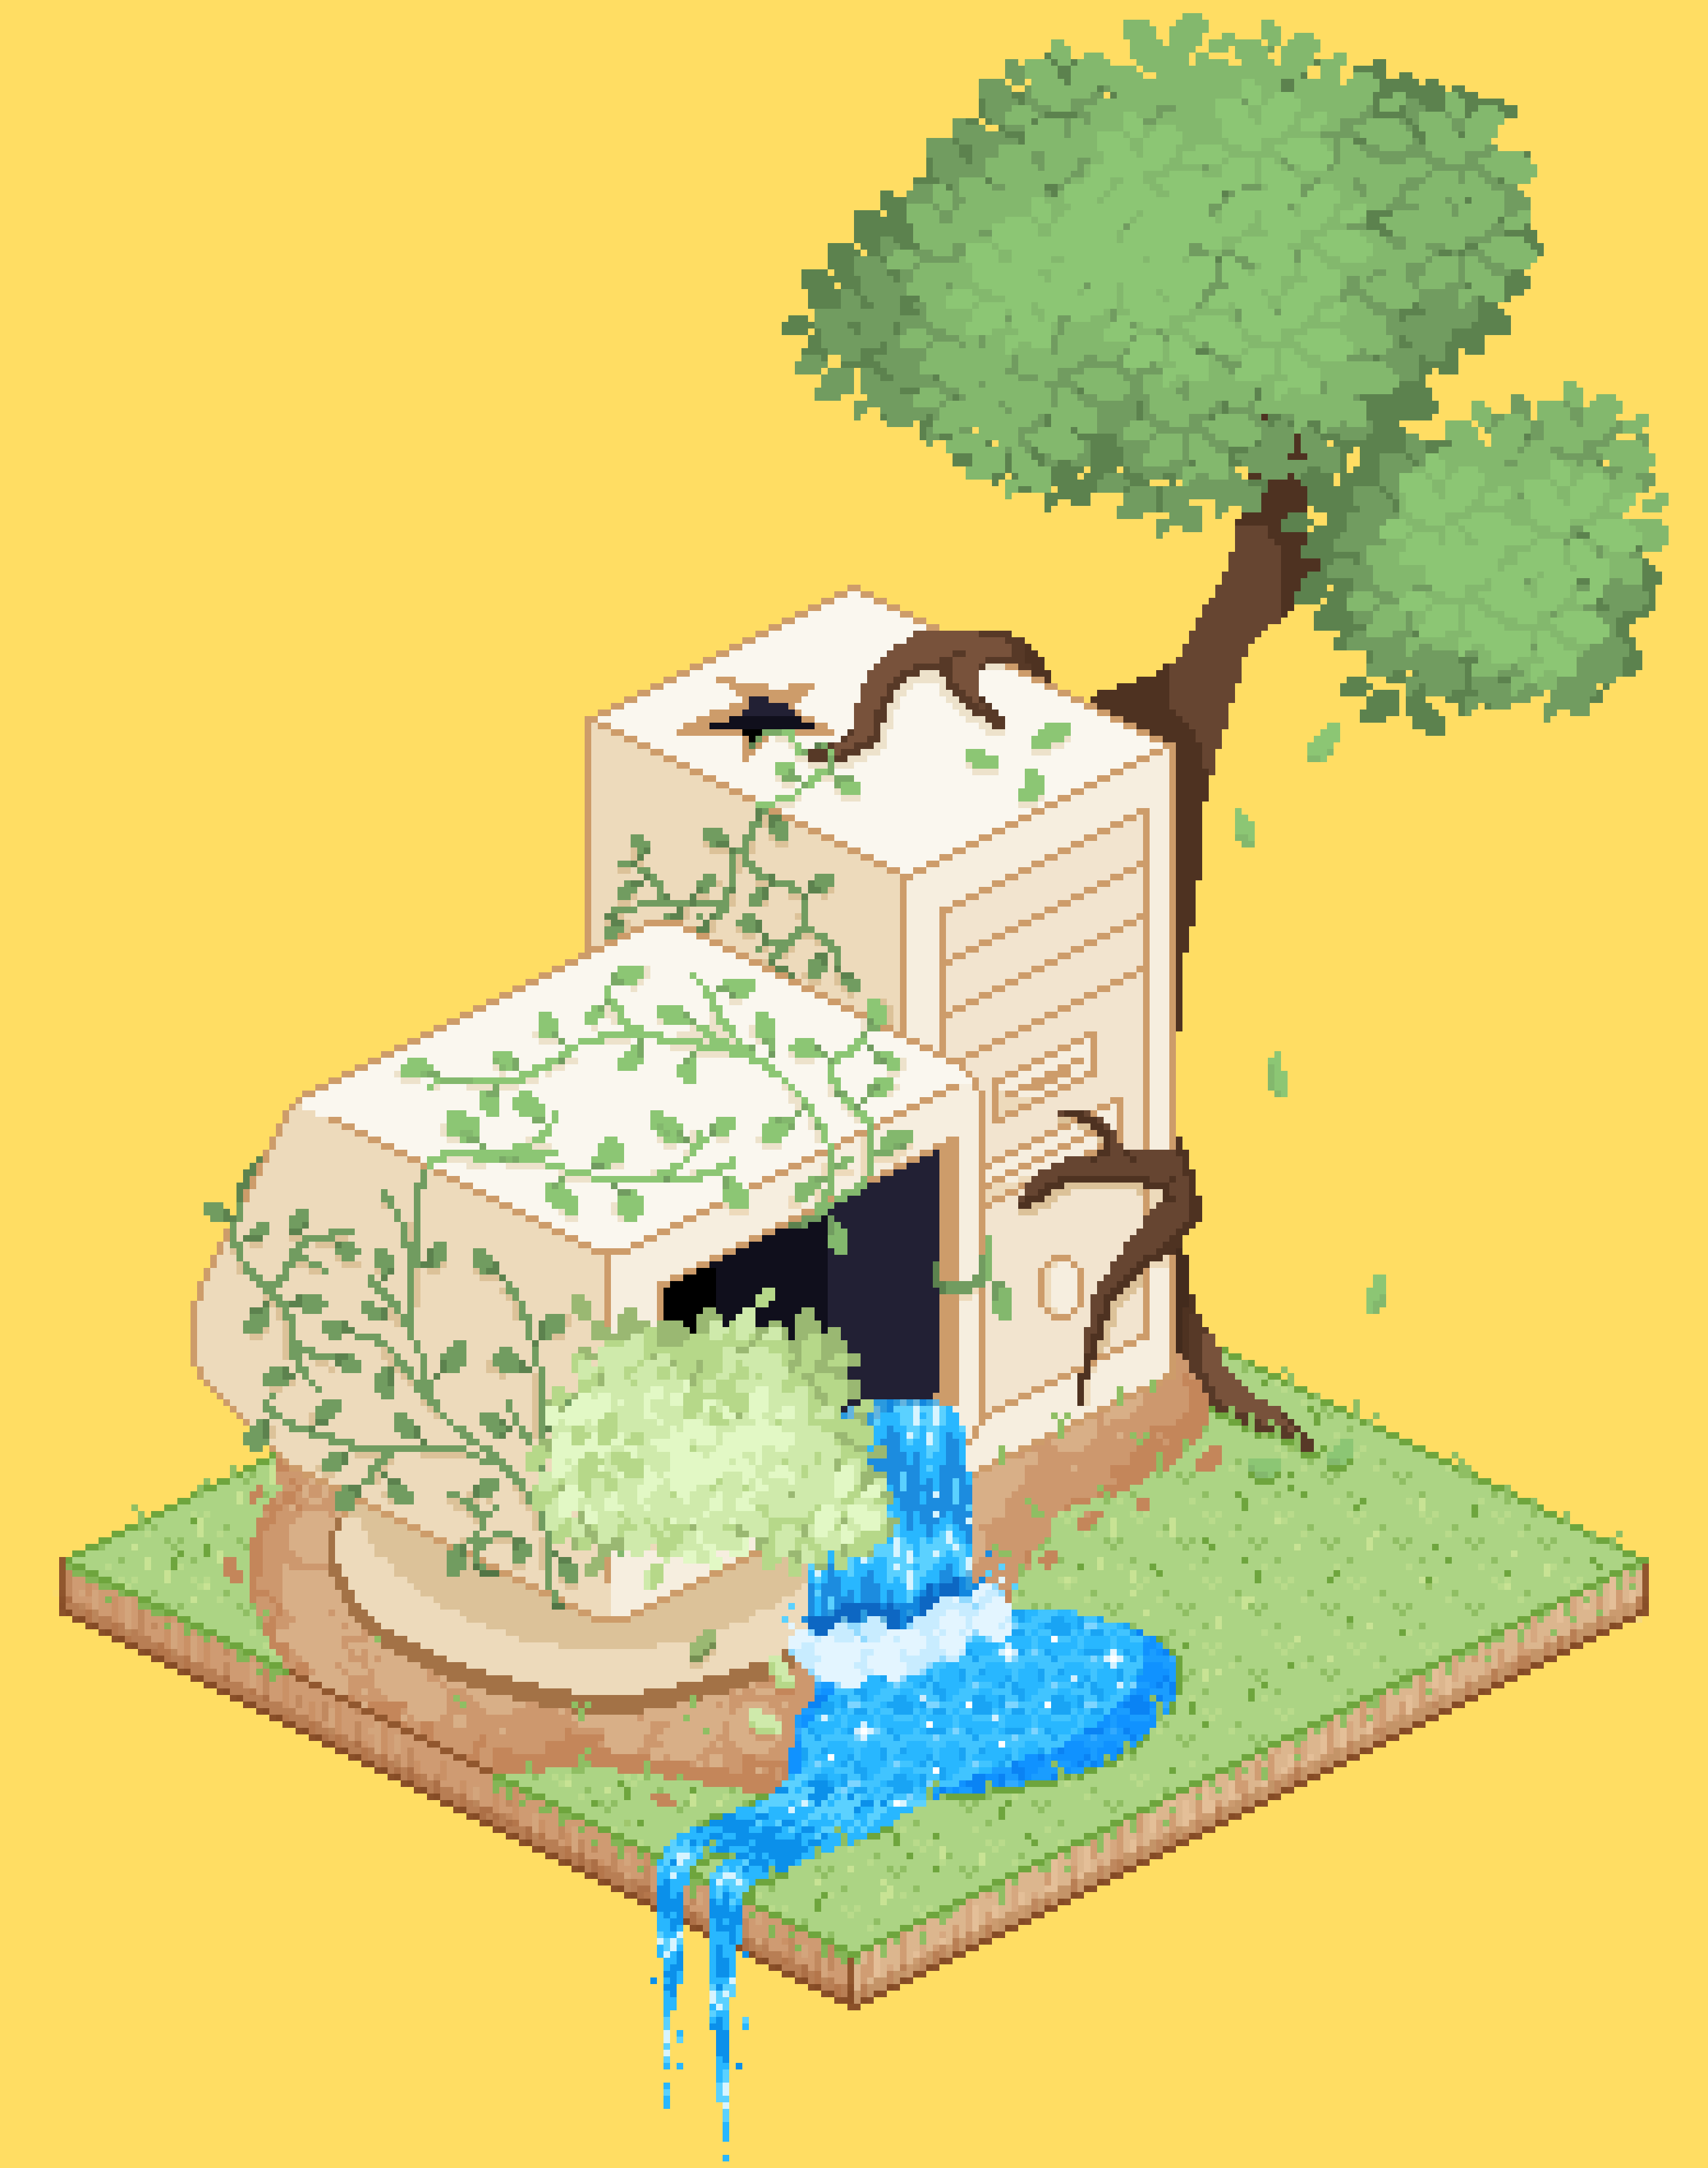 A pixel art illustration in isometric perspective. There is a large desktop computer in the center with a tree breaking through and water flowing from it.